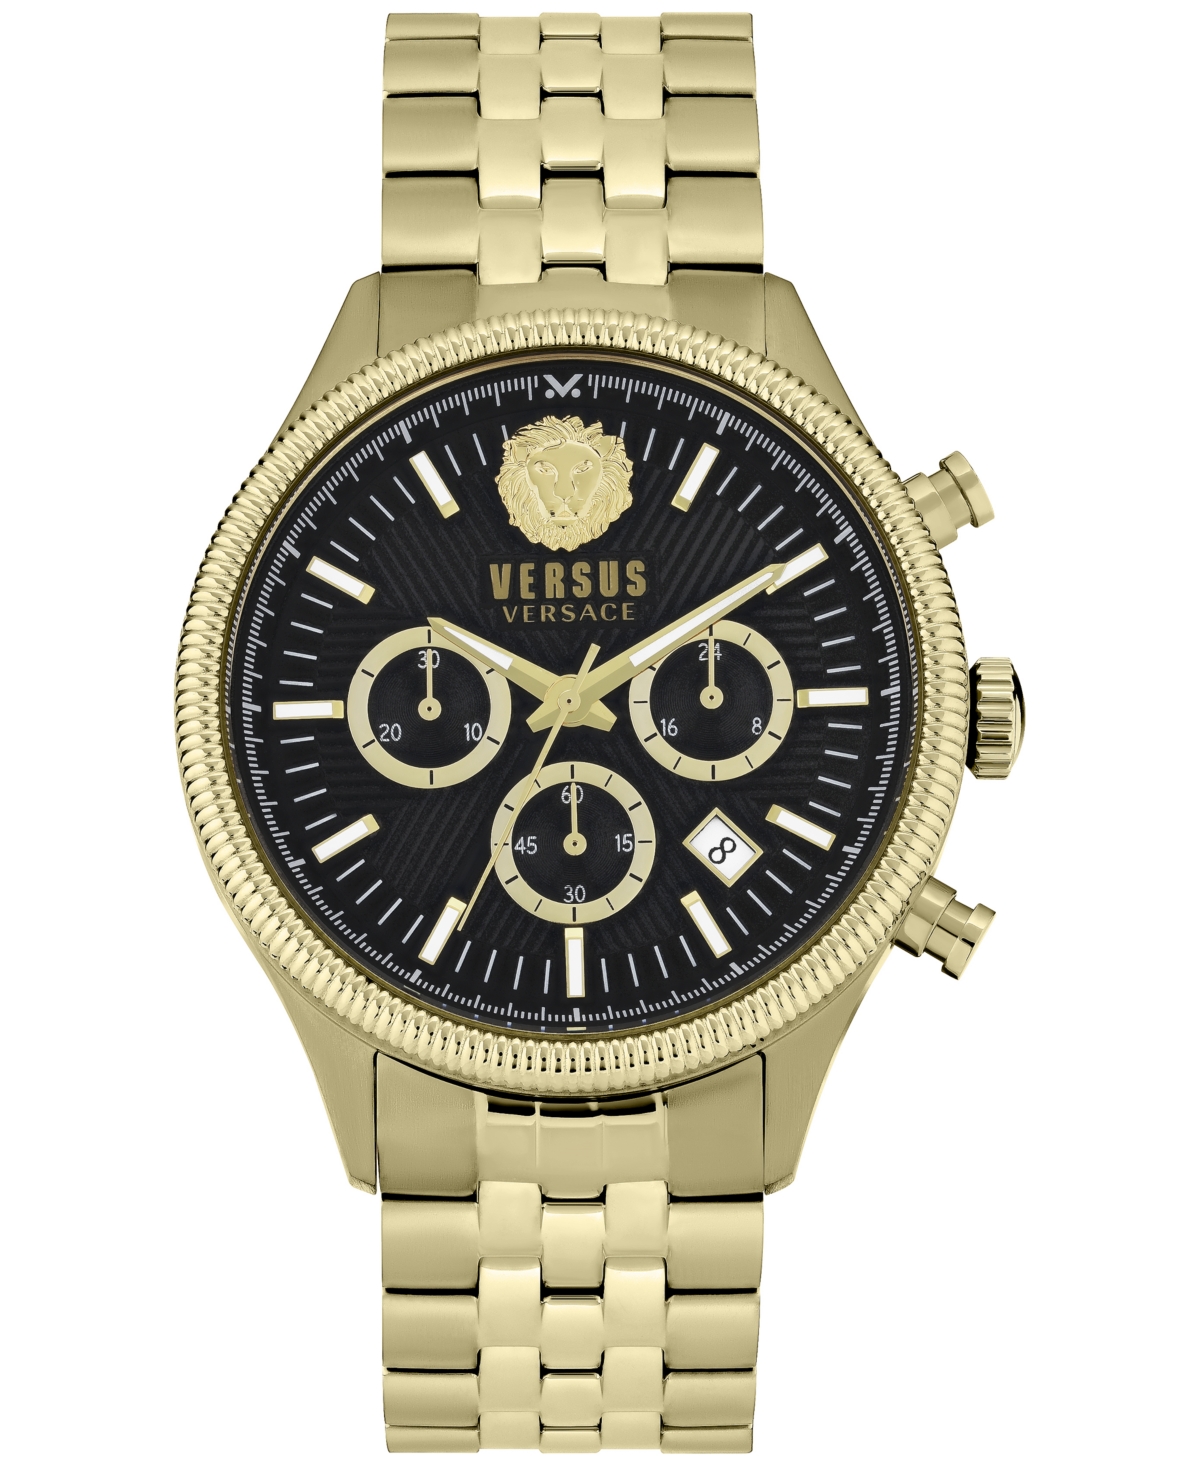 VERSUS MEN'S CHRONOGRAPH COLONNE ION PLATED STAINLESS STEEL BRACELET WATCH 44MM